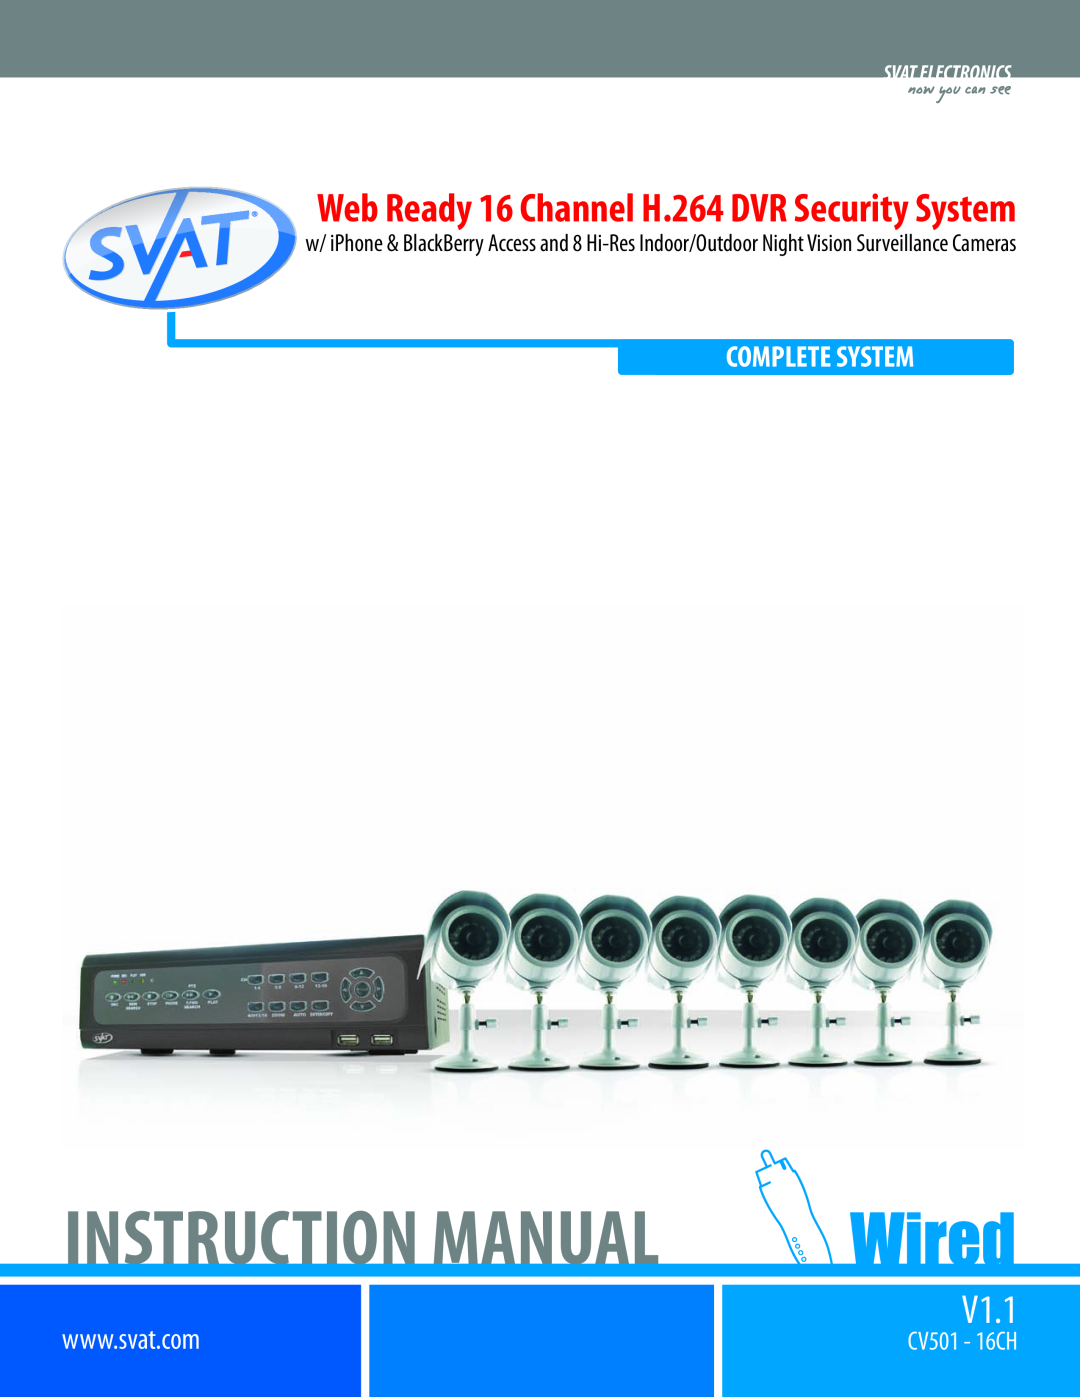 SVAT Electronics CV501 - 16CH instruction manual Complete System, Instruction Manual, V1.1, now you can see 